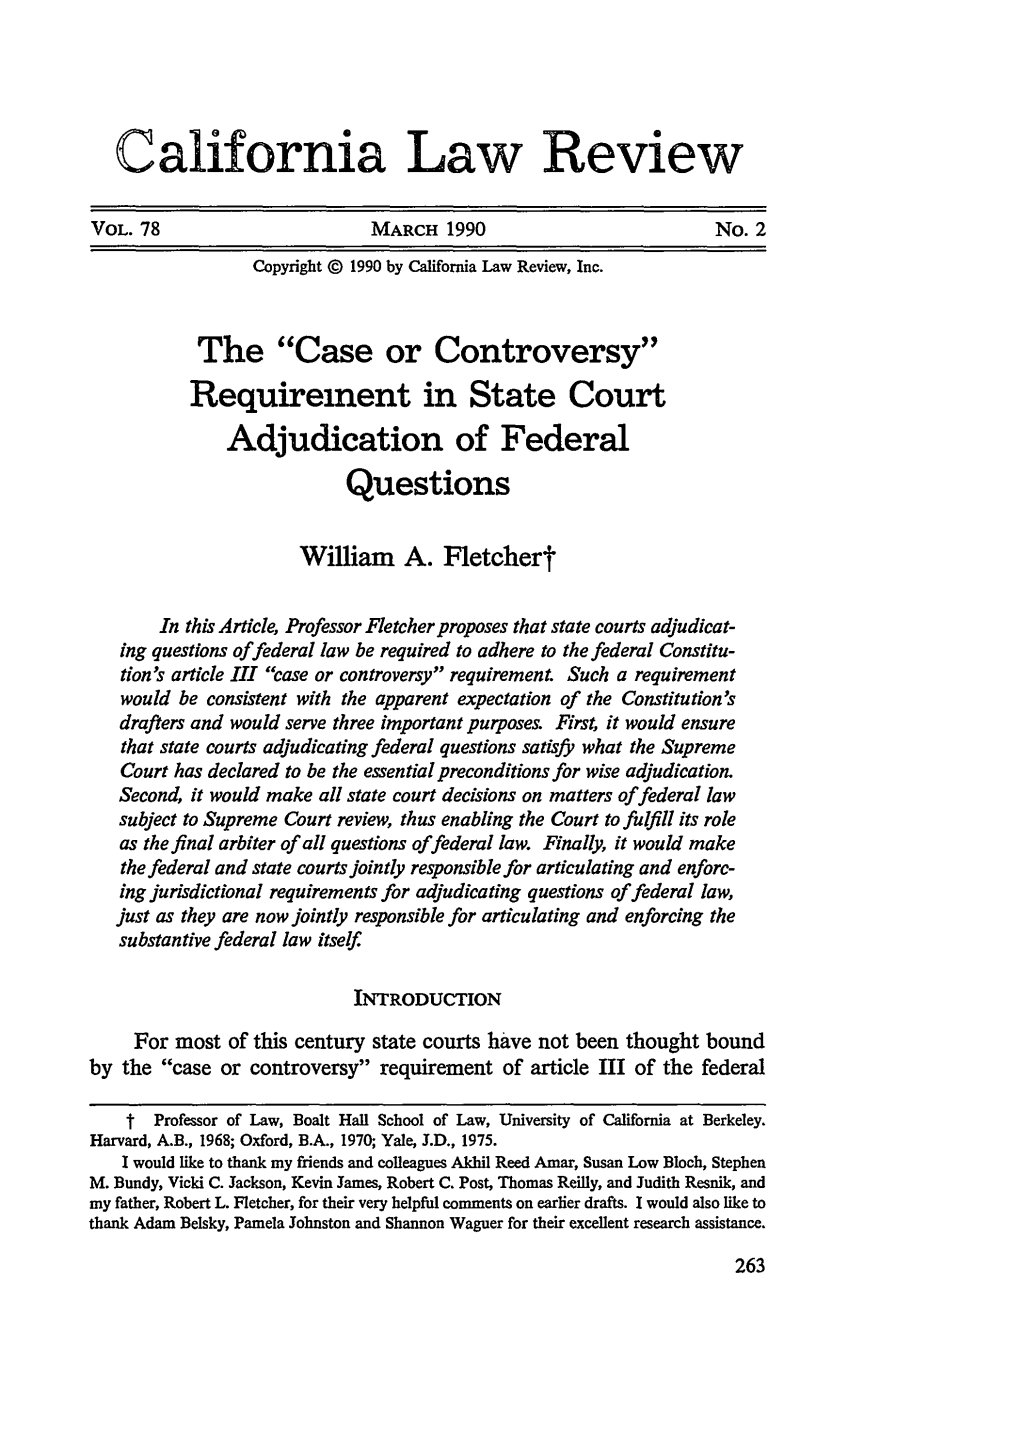 The Case Or Controversy Requirement in State Court